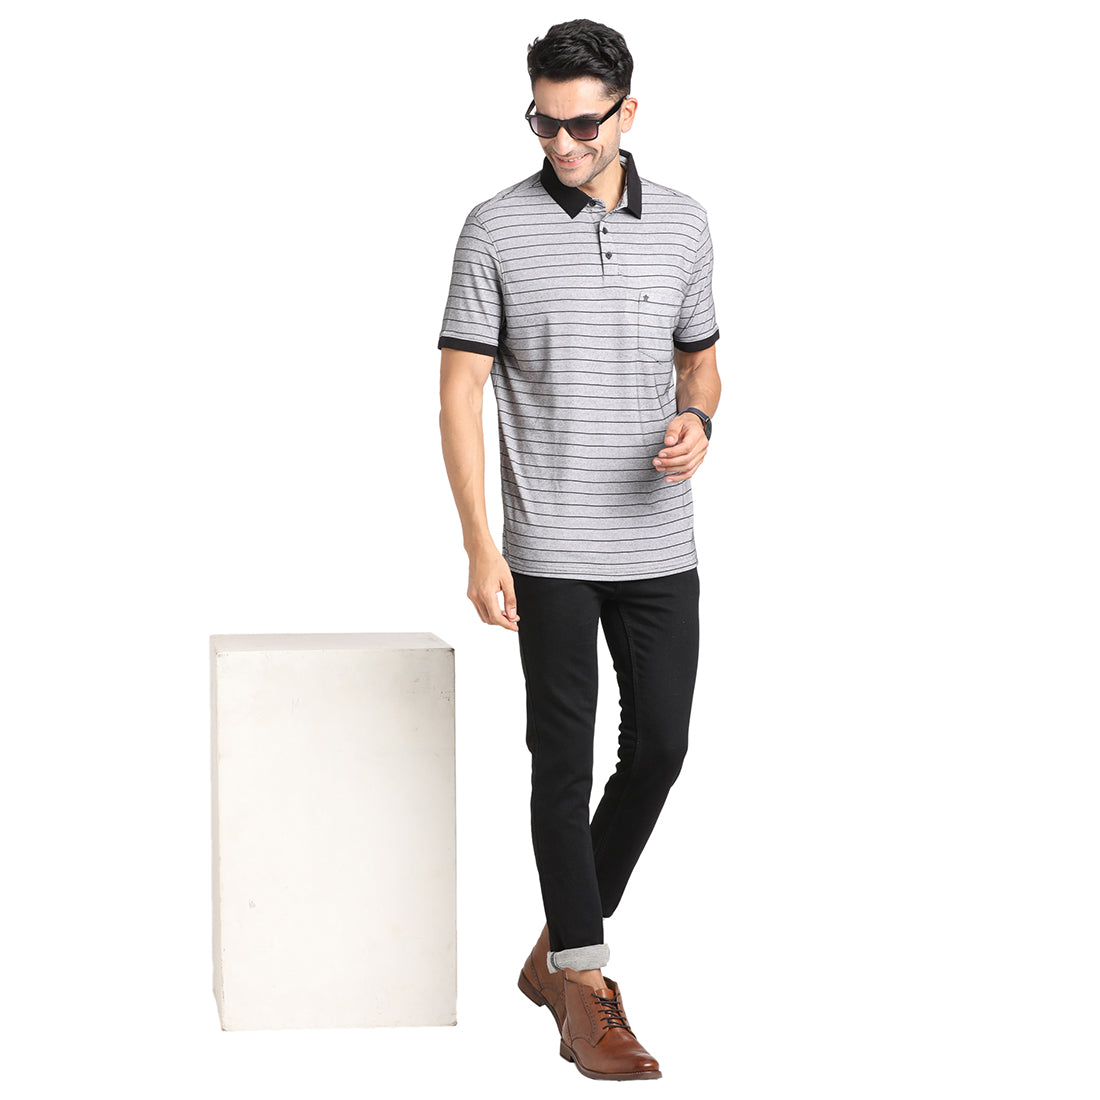 Knitted Grey Striped Polo Neck Half Sleeve Casual T-Shirt